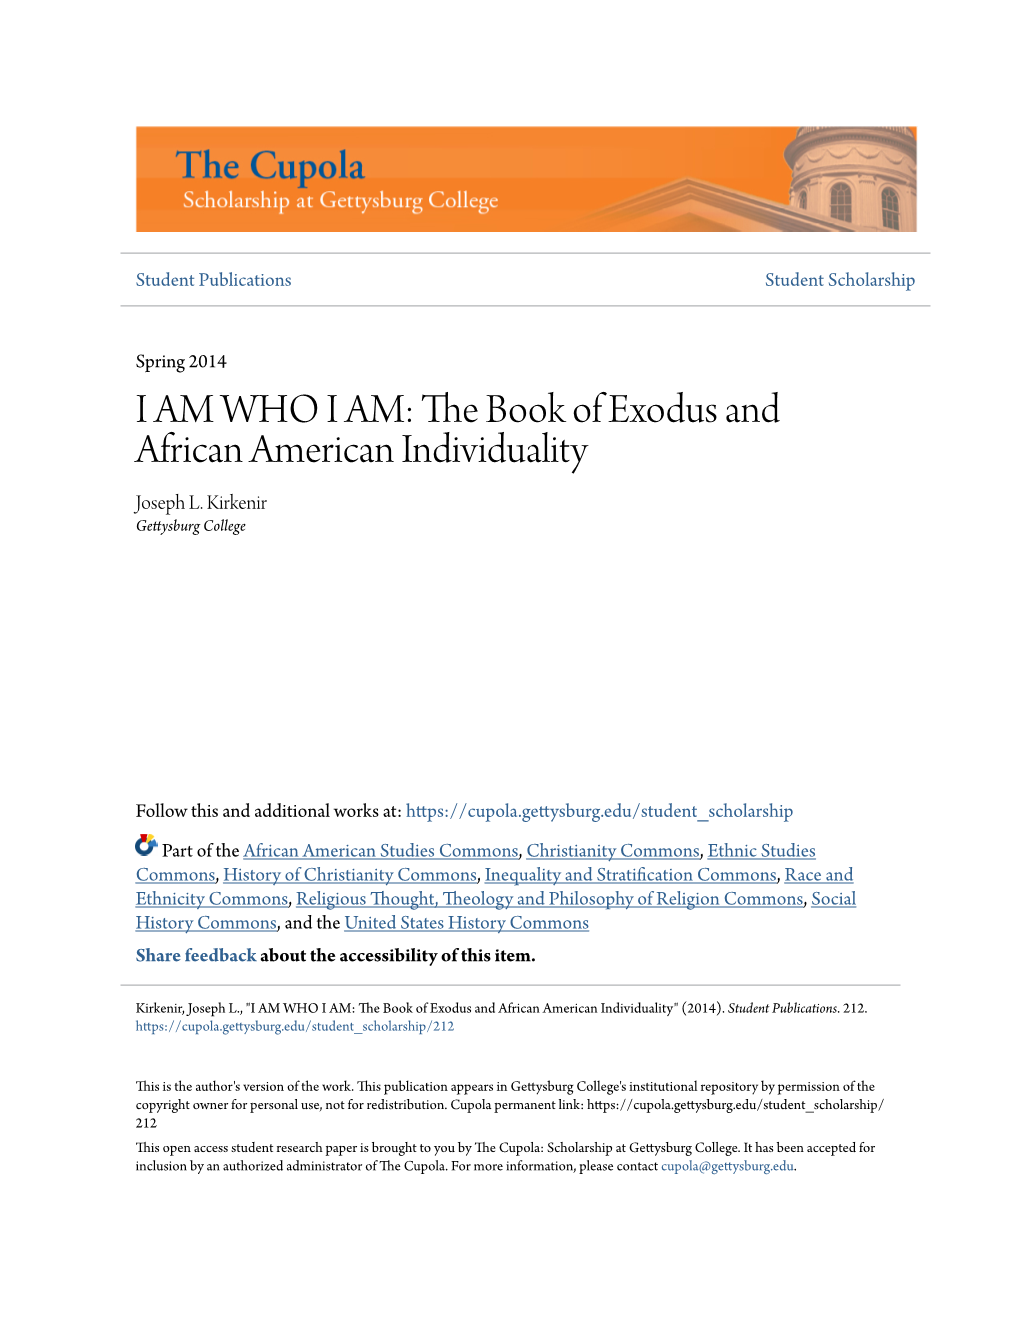 The Book of Exodus and African American Individuality Joseph L